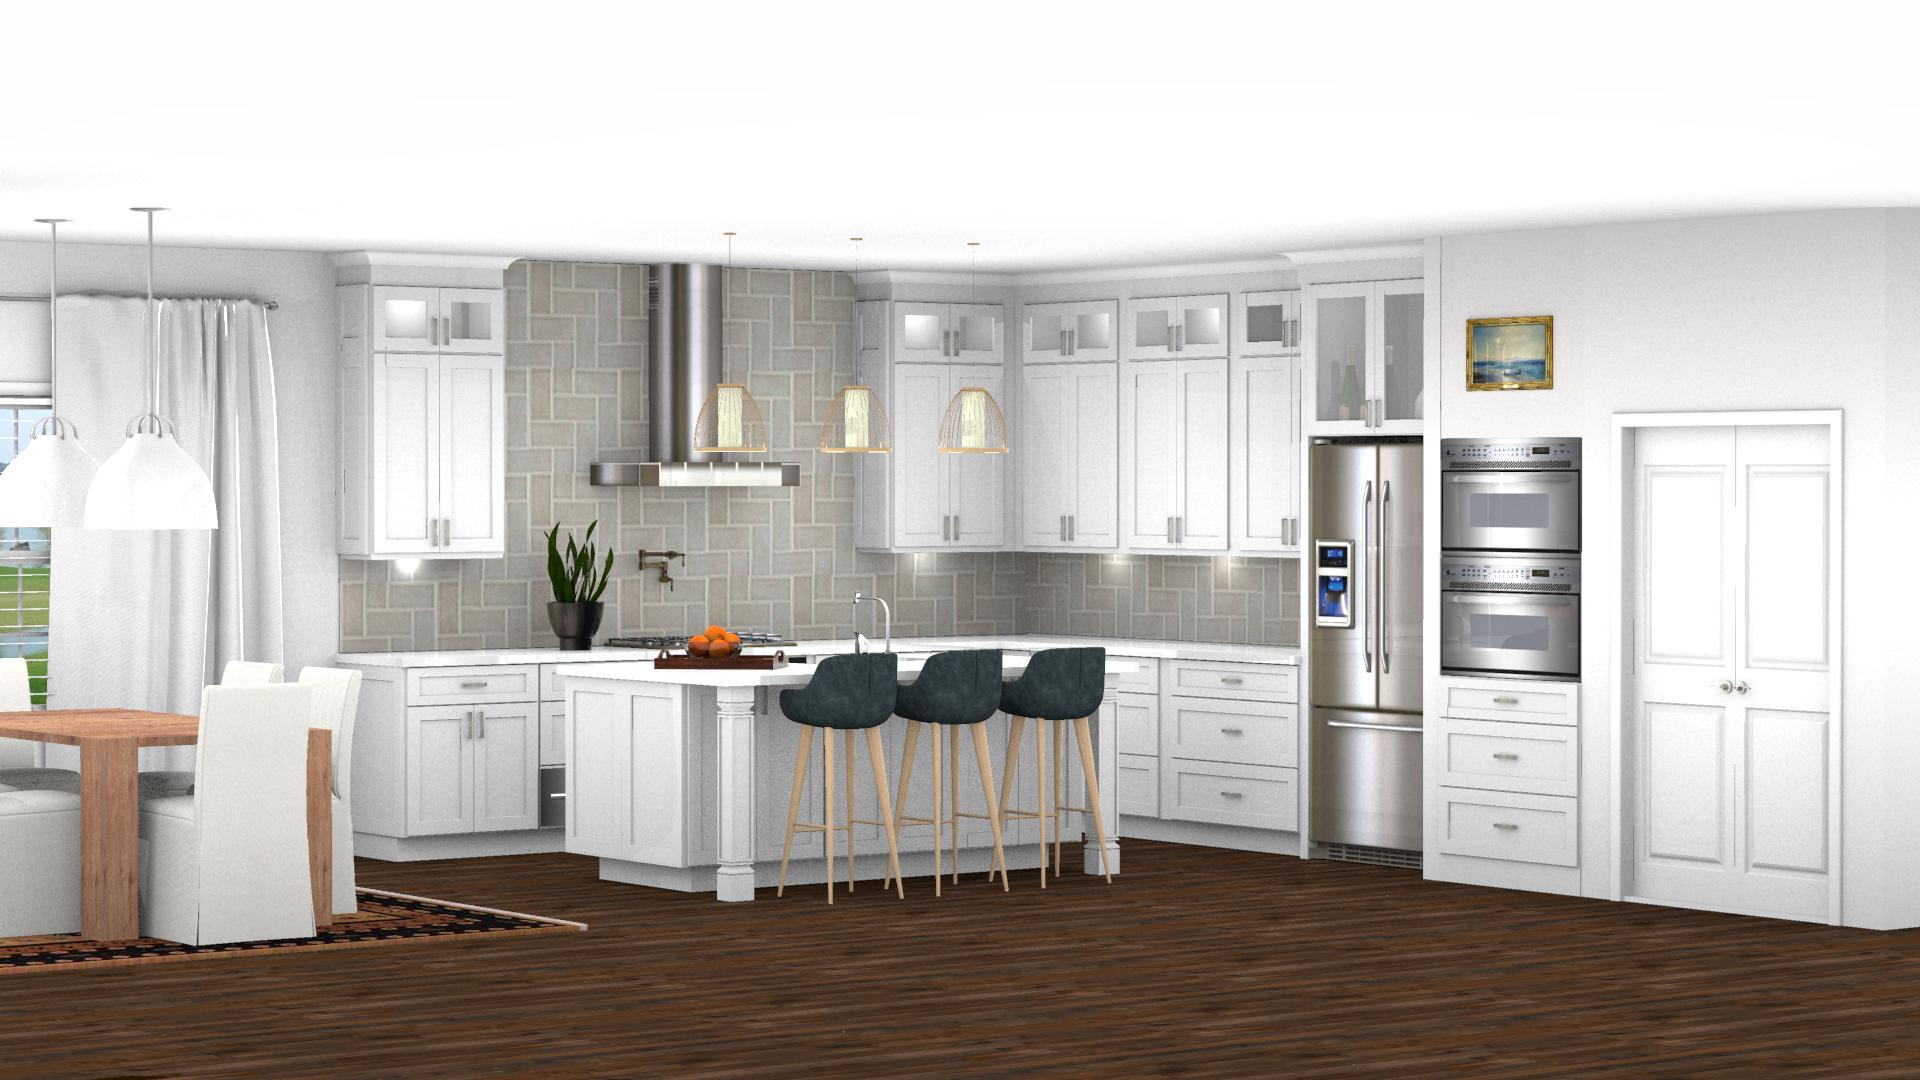 St. Jude Dream Home Kitchen Rendering Pic 1